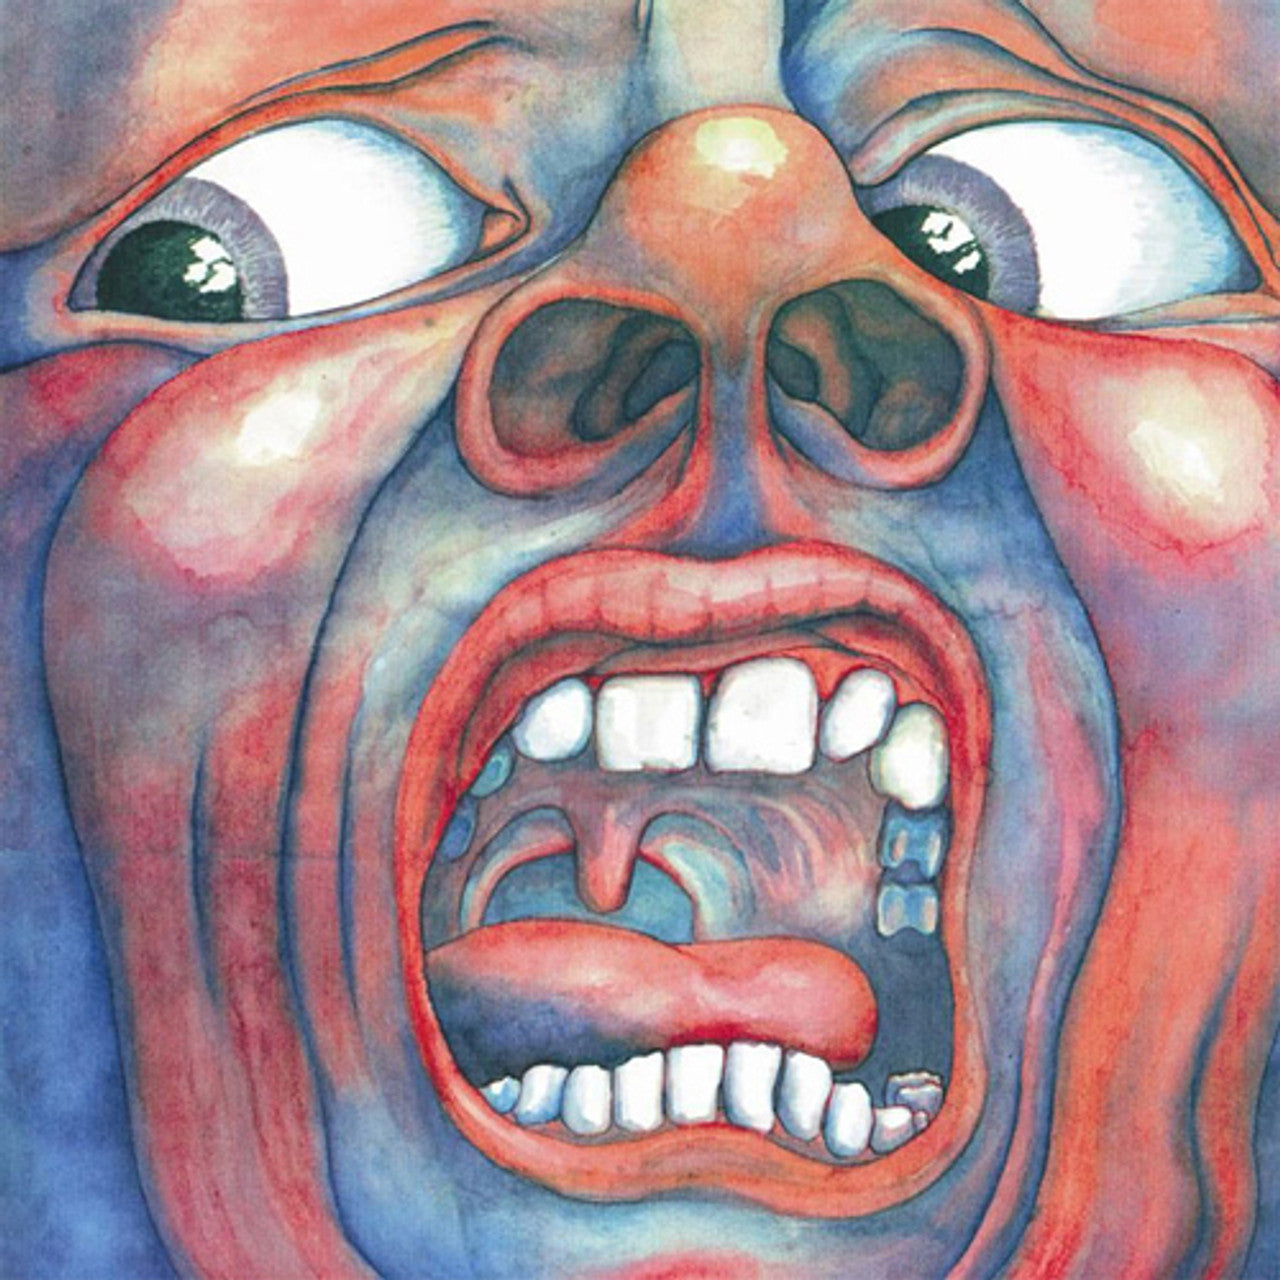 King Crimson "In The Court of the Crimson King"